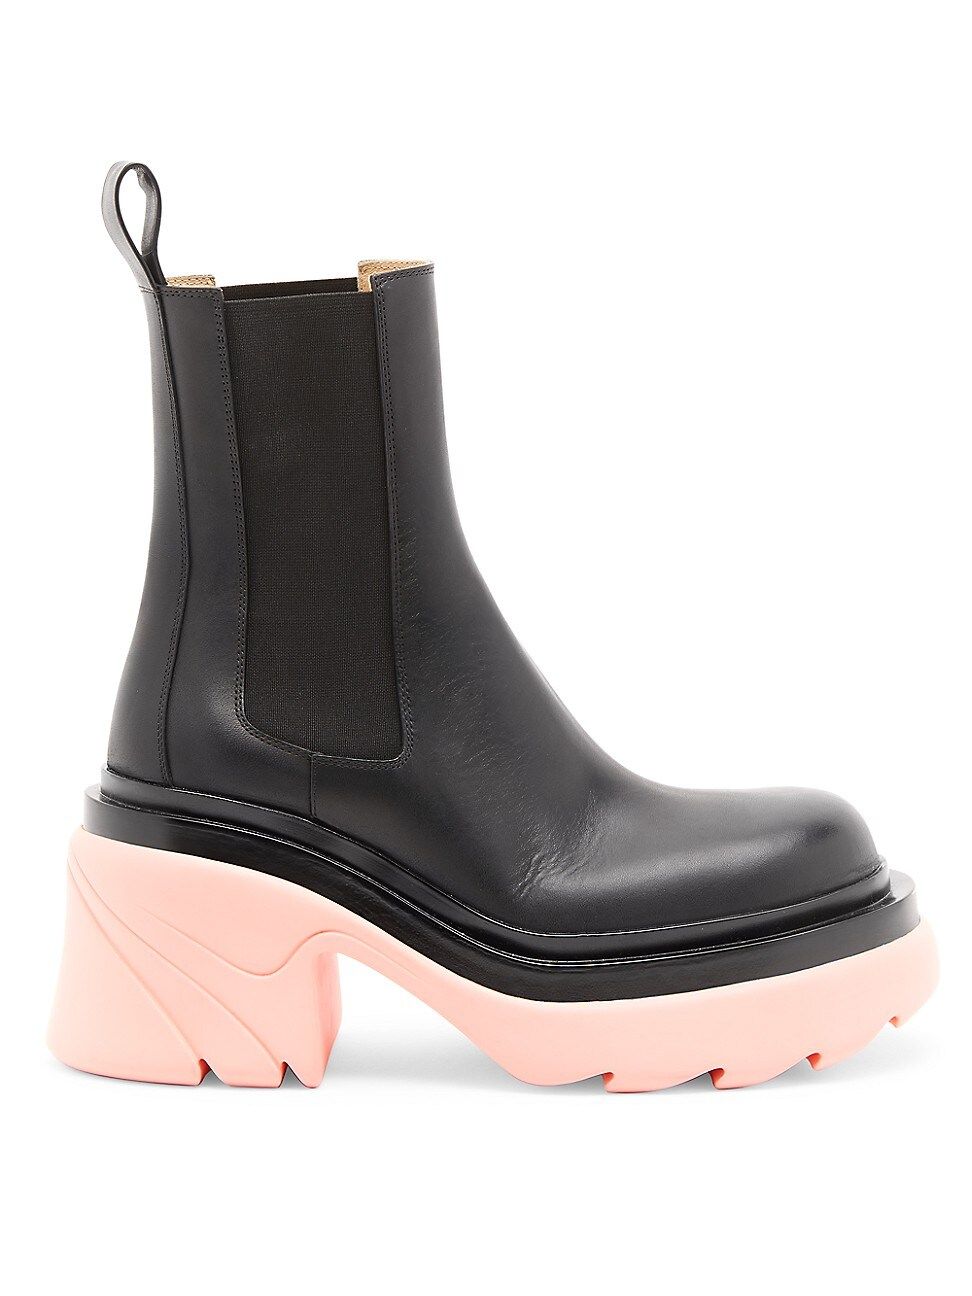 Wardrobe 02 Flash Contrast-Sole Tire Ankle Boots | Saks Fifth Avenue